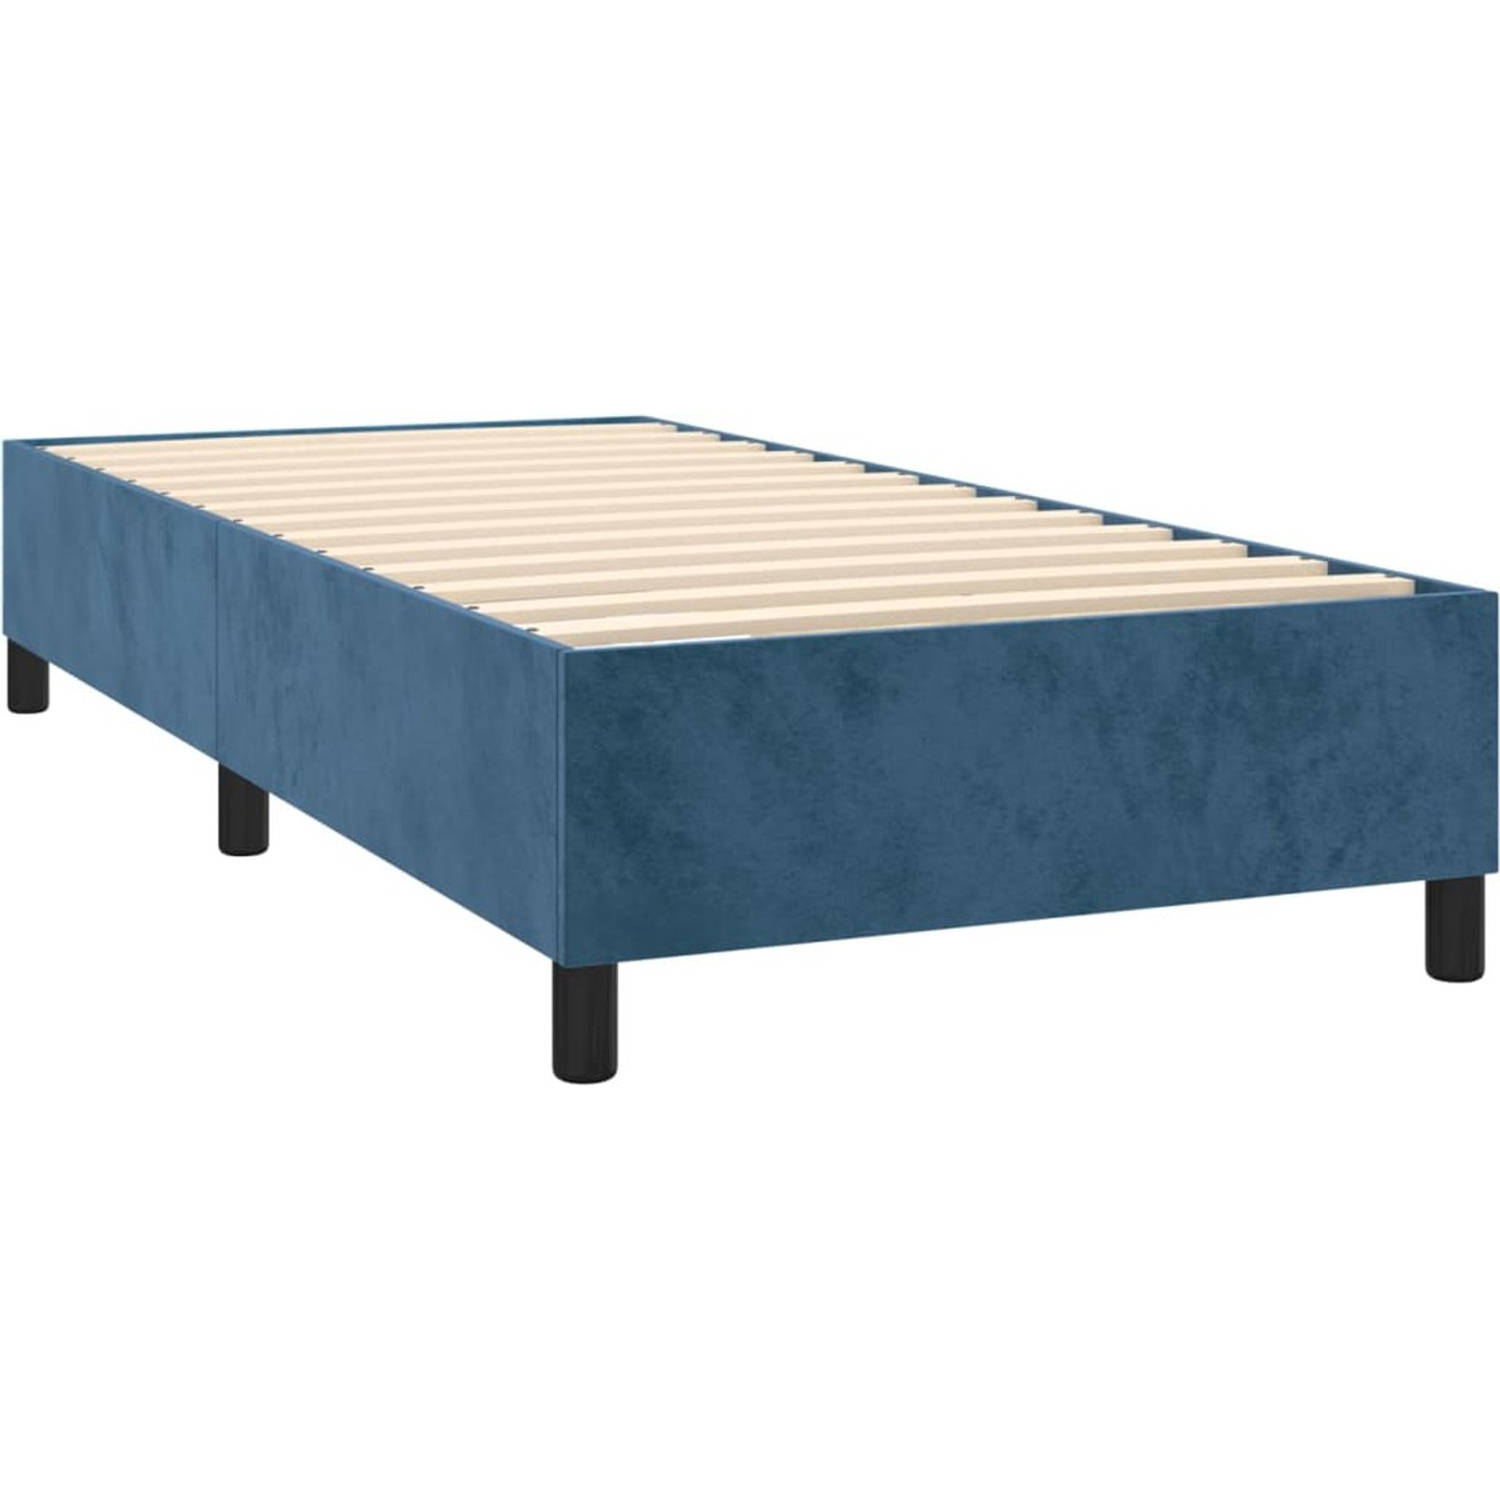 The Living Store Boxspringbed - Donkerblauw - 203x100x118/128 cm - Zacht Fluweel